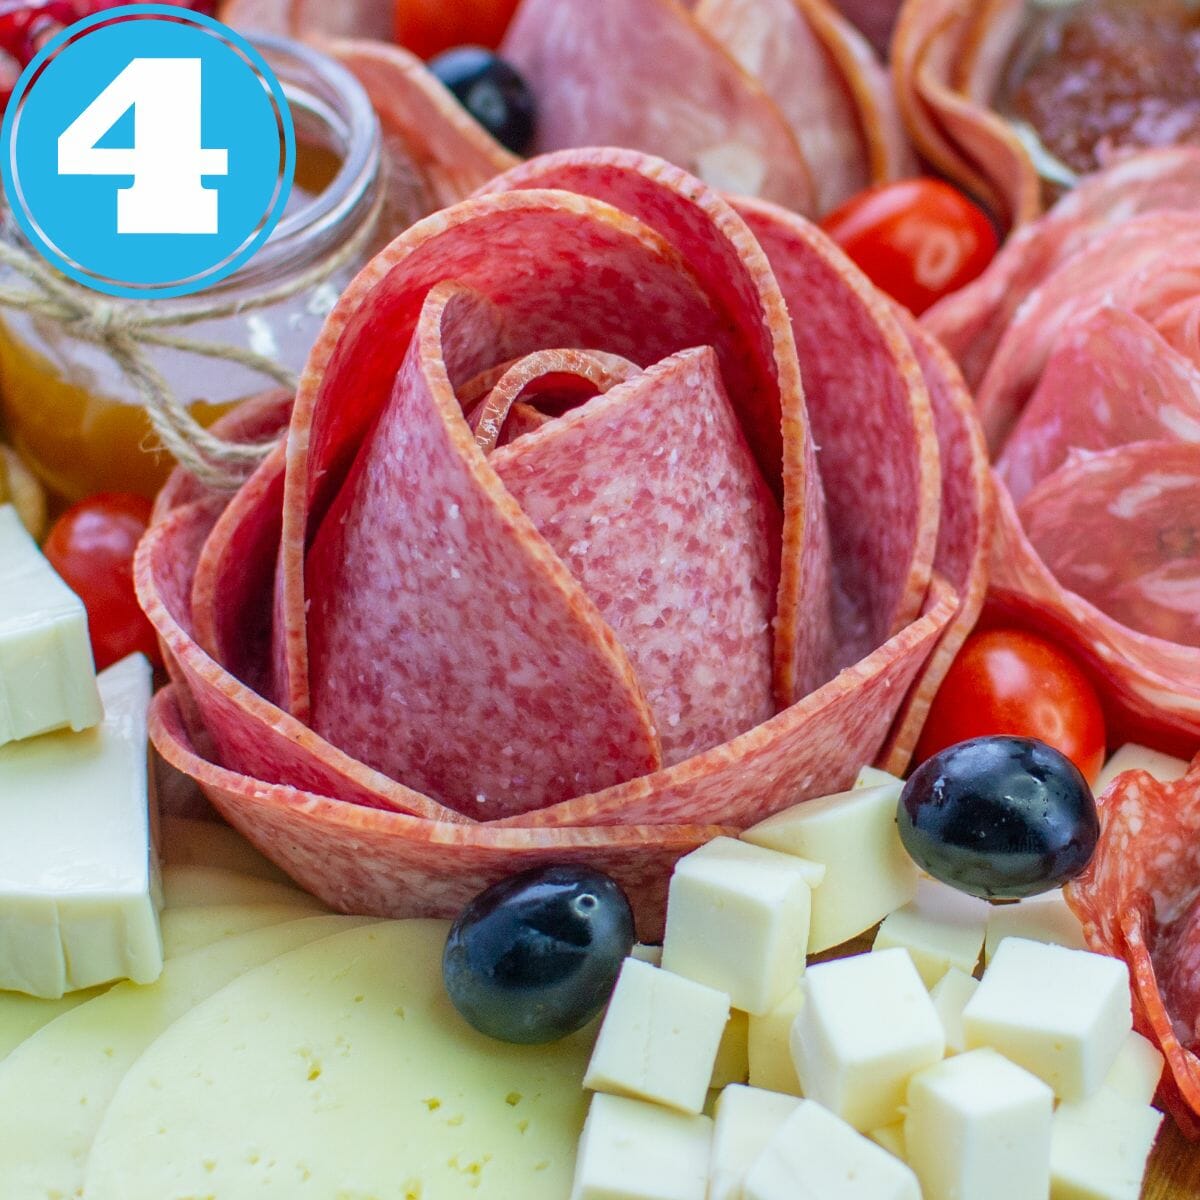 How To Fold Charcuterie Salami Rose - [Picture And Video]